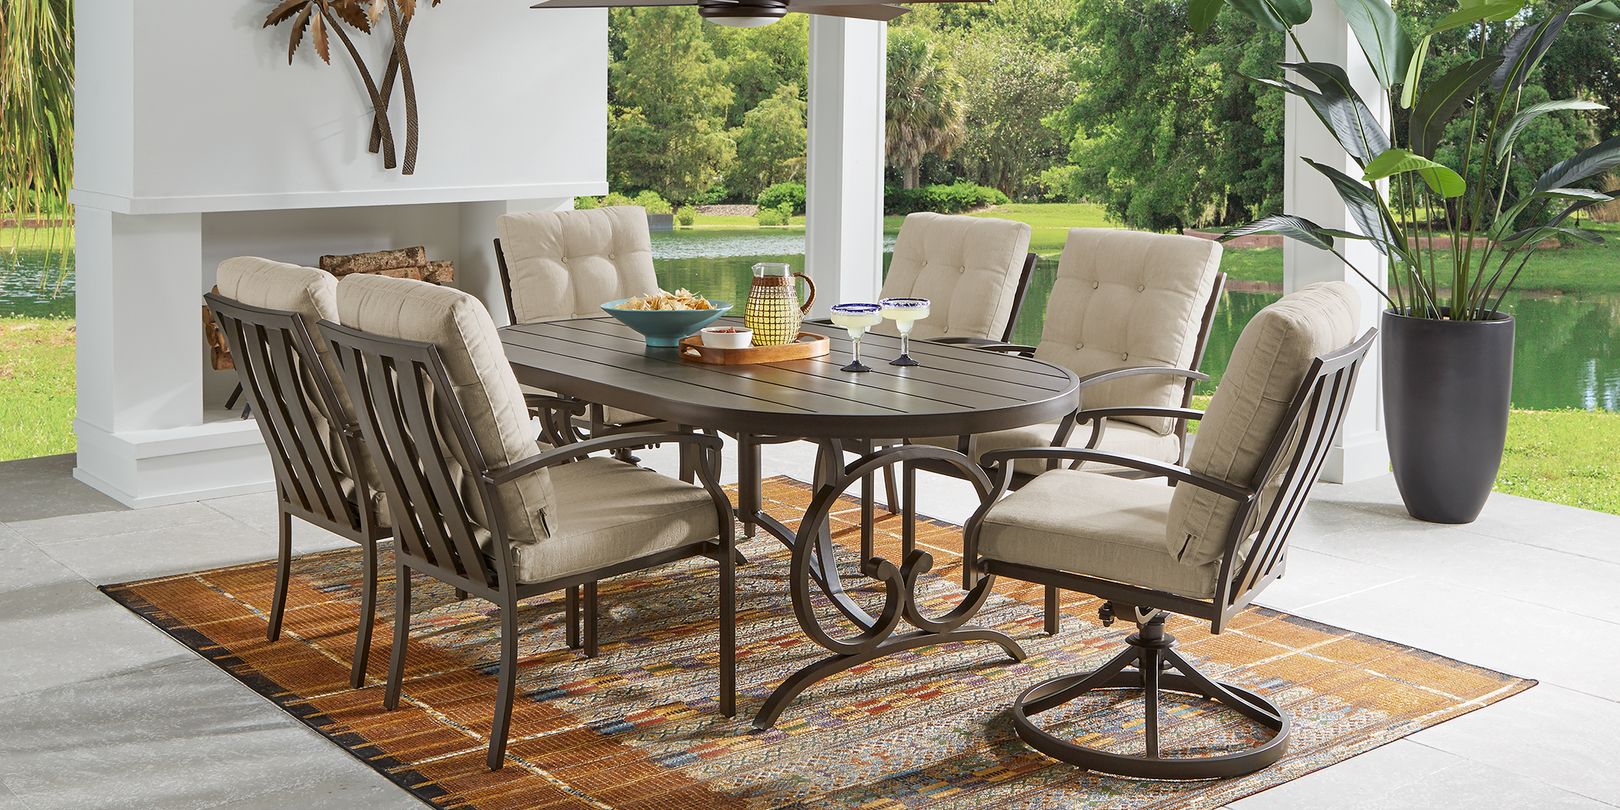 Photo of bronze patio dining table with chairs